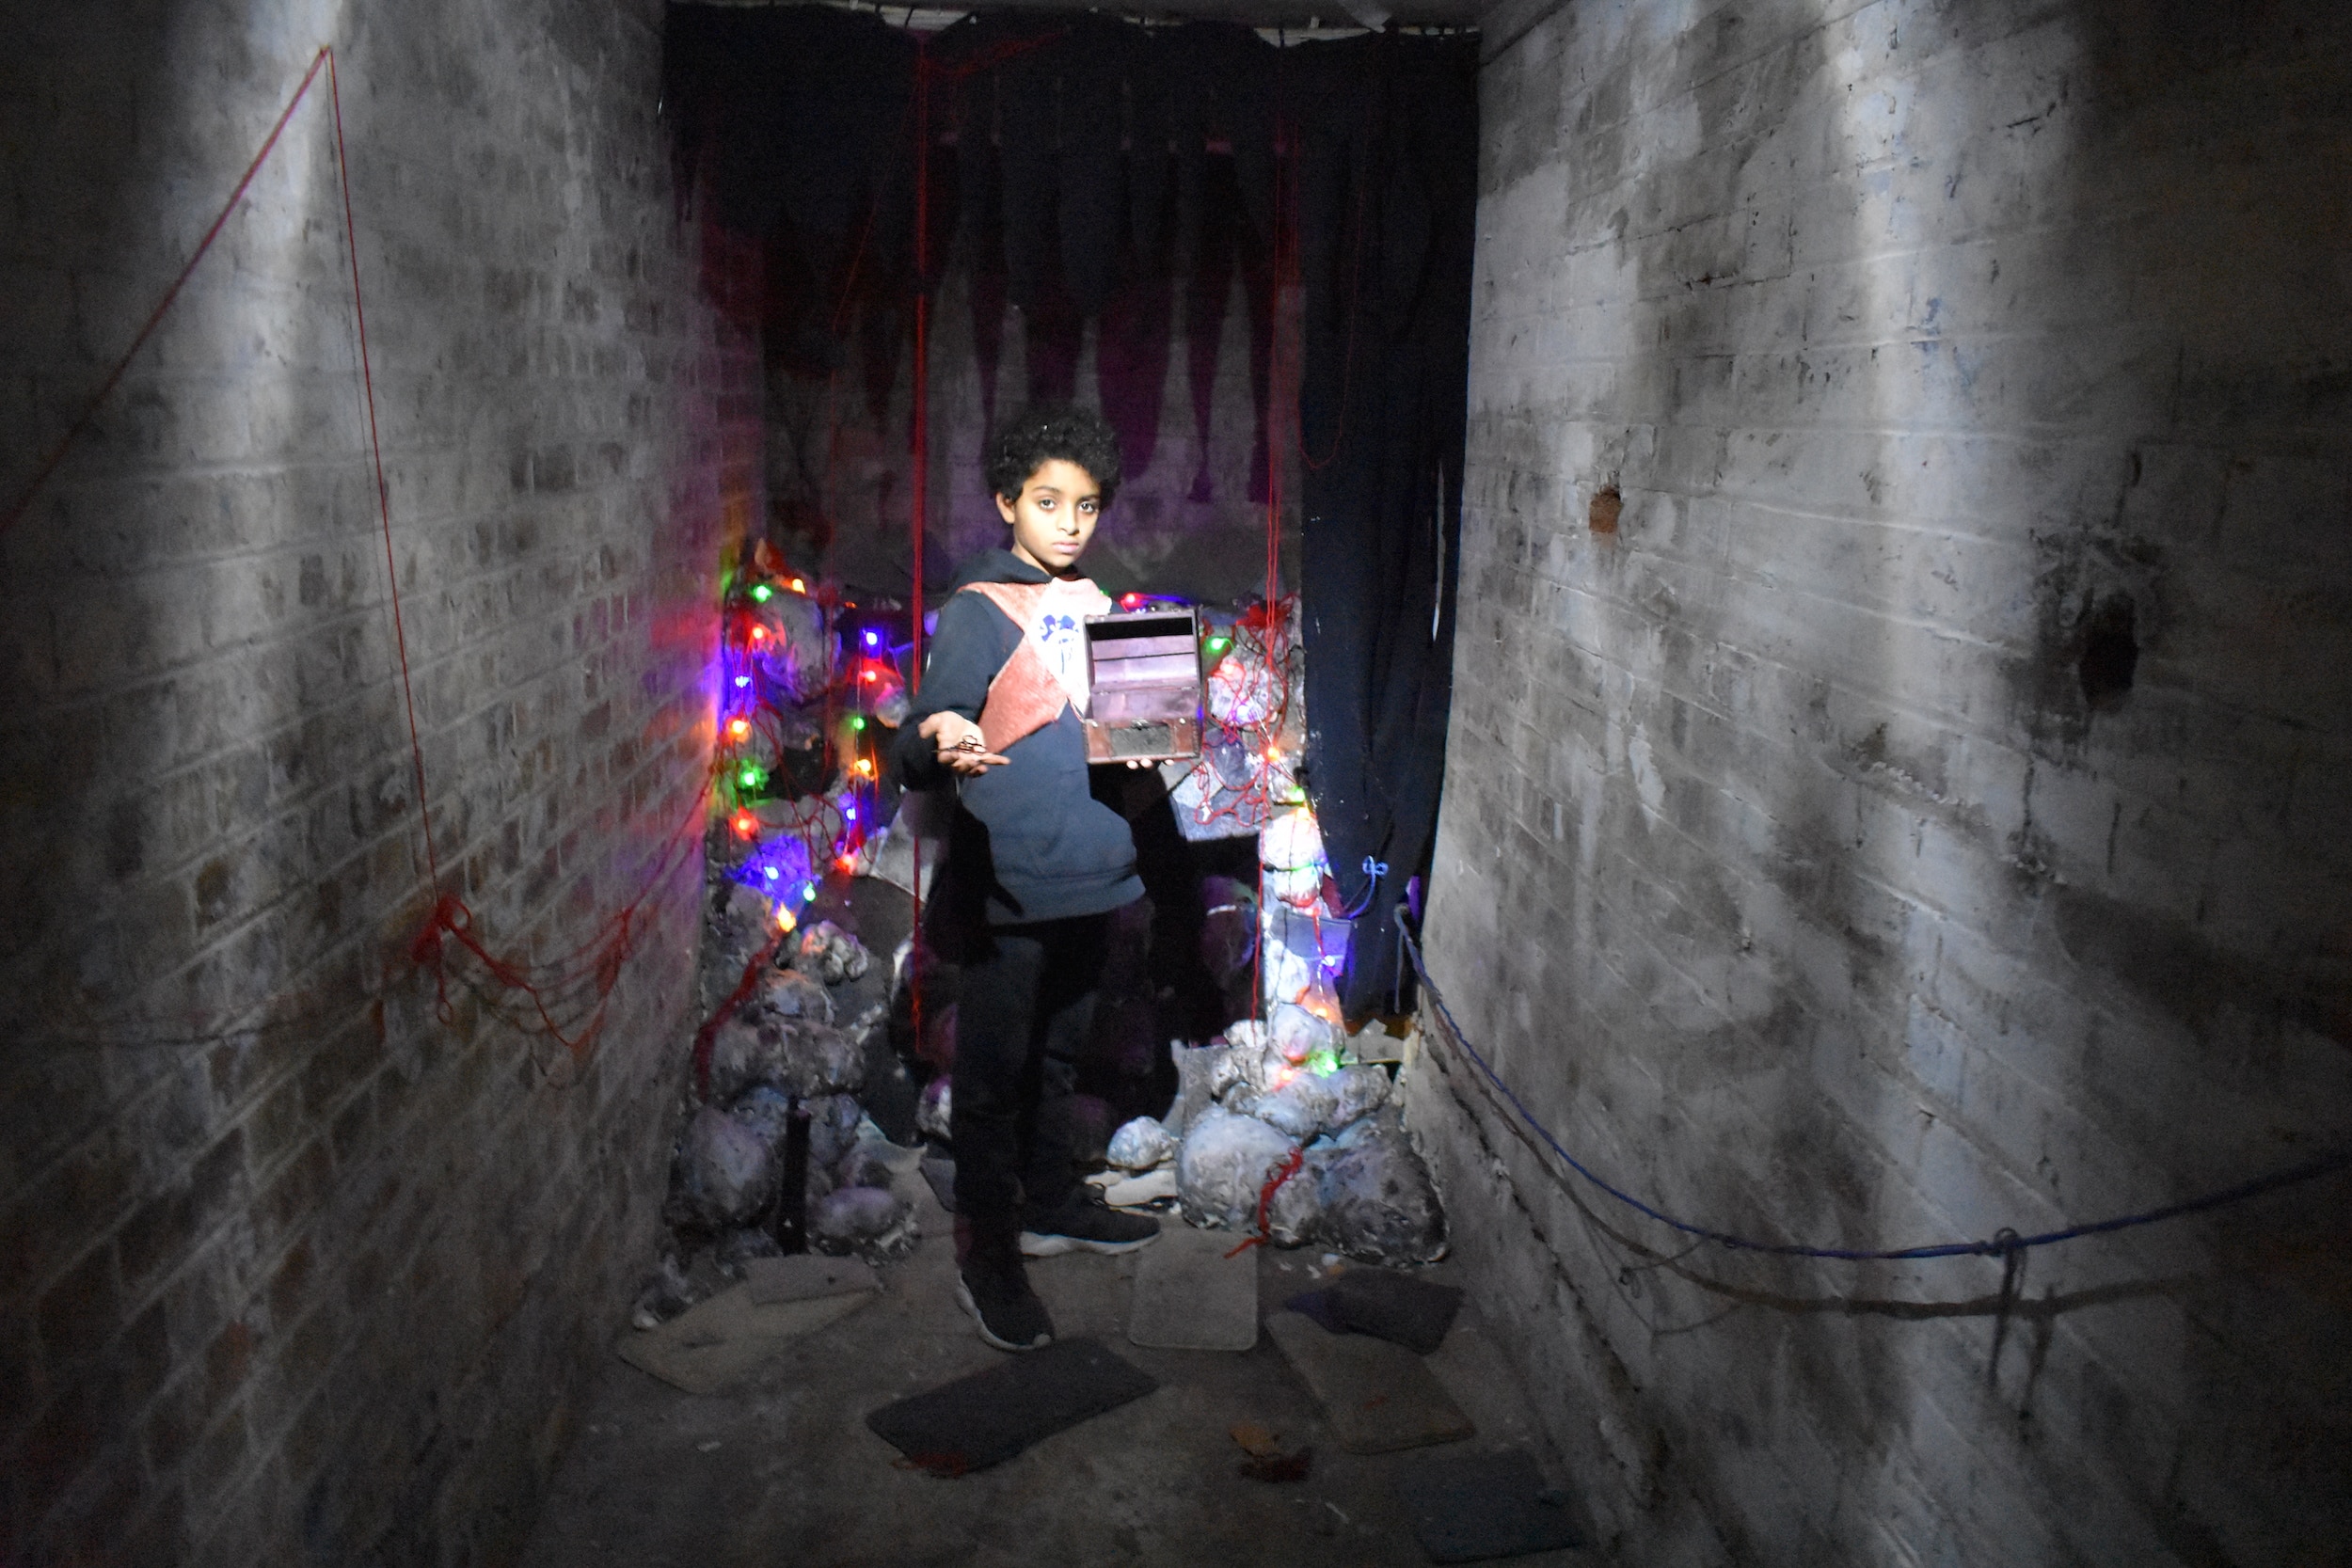 Photograph of a young boy holding a treasure chest in a decorated basement.